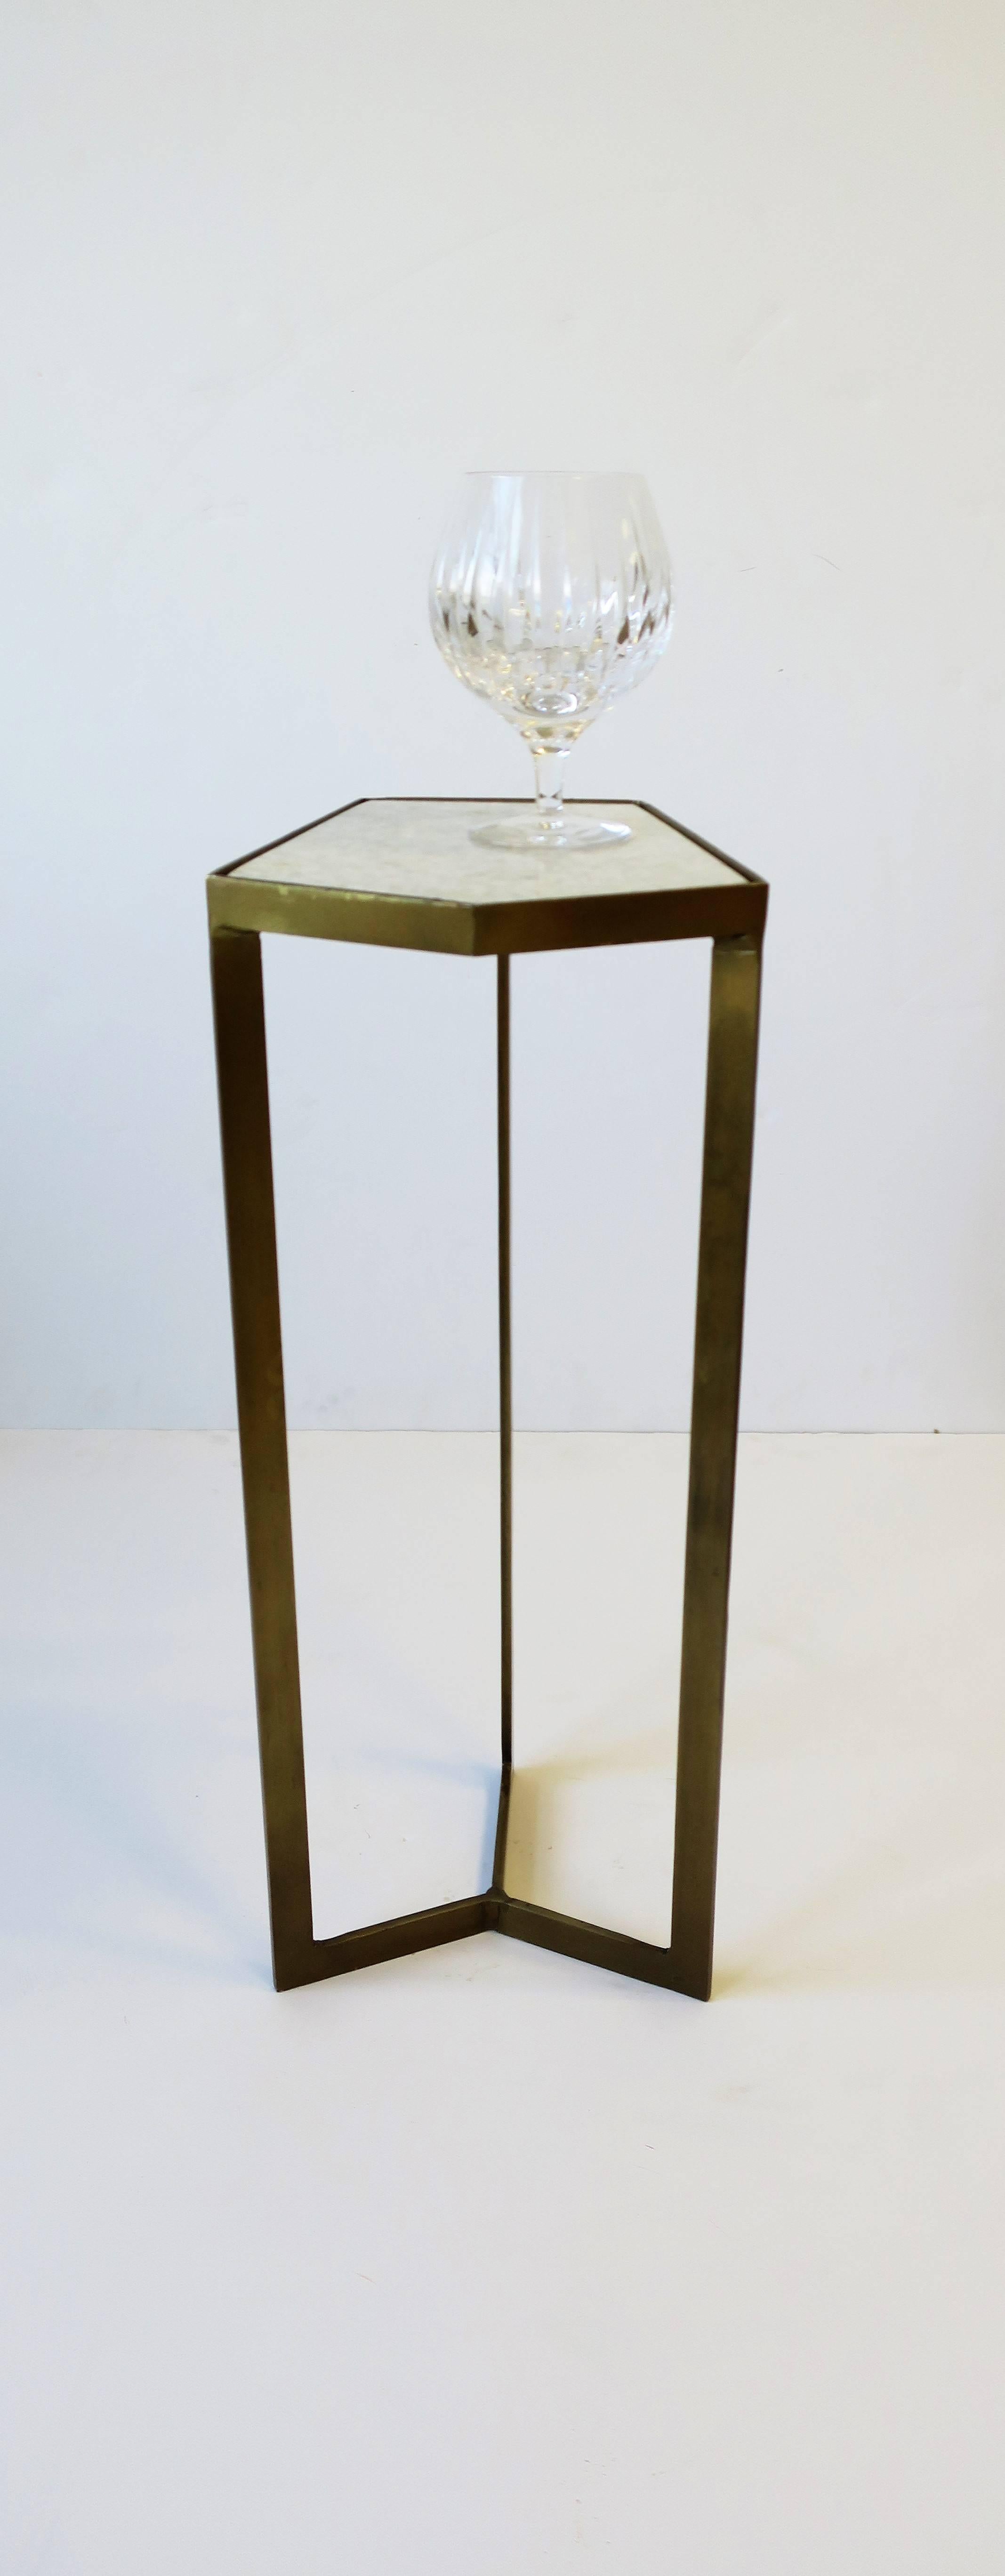 Powder-Coated Side or Drinks Table with Matte Gold Base and White Marble Top